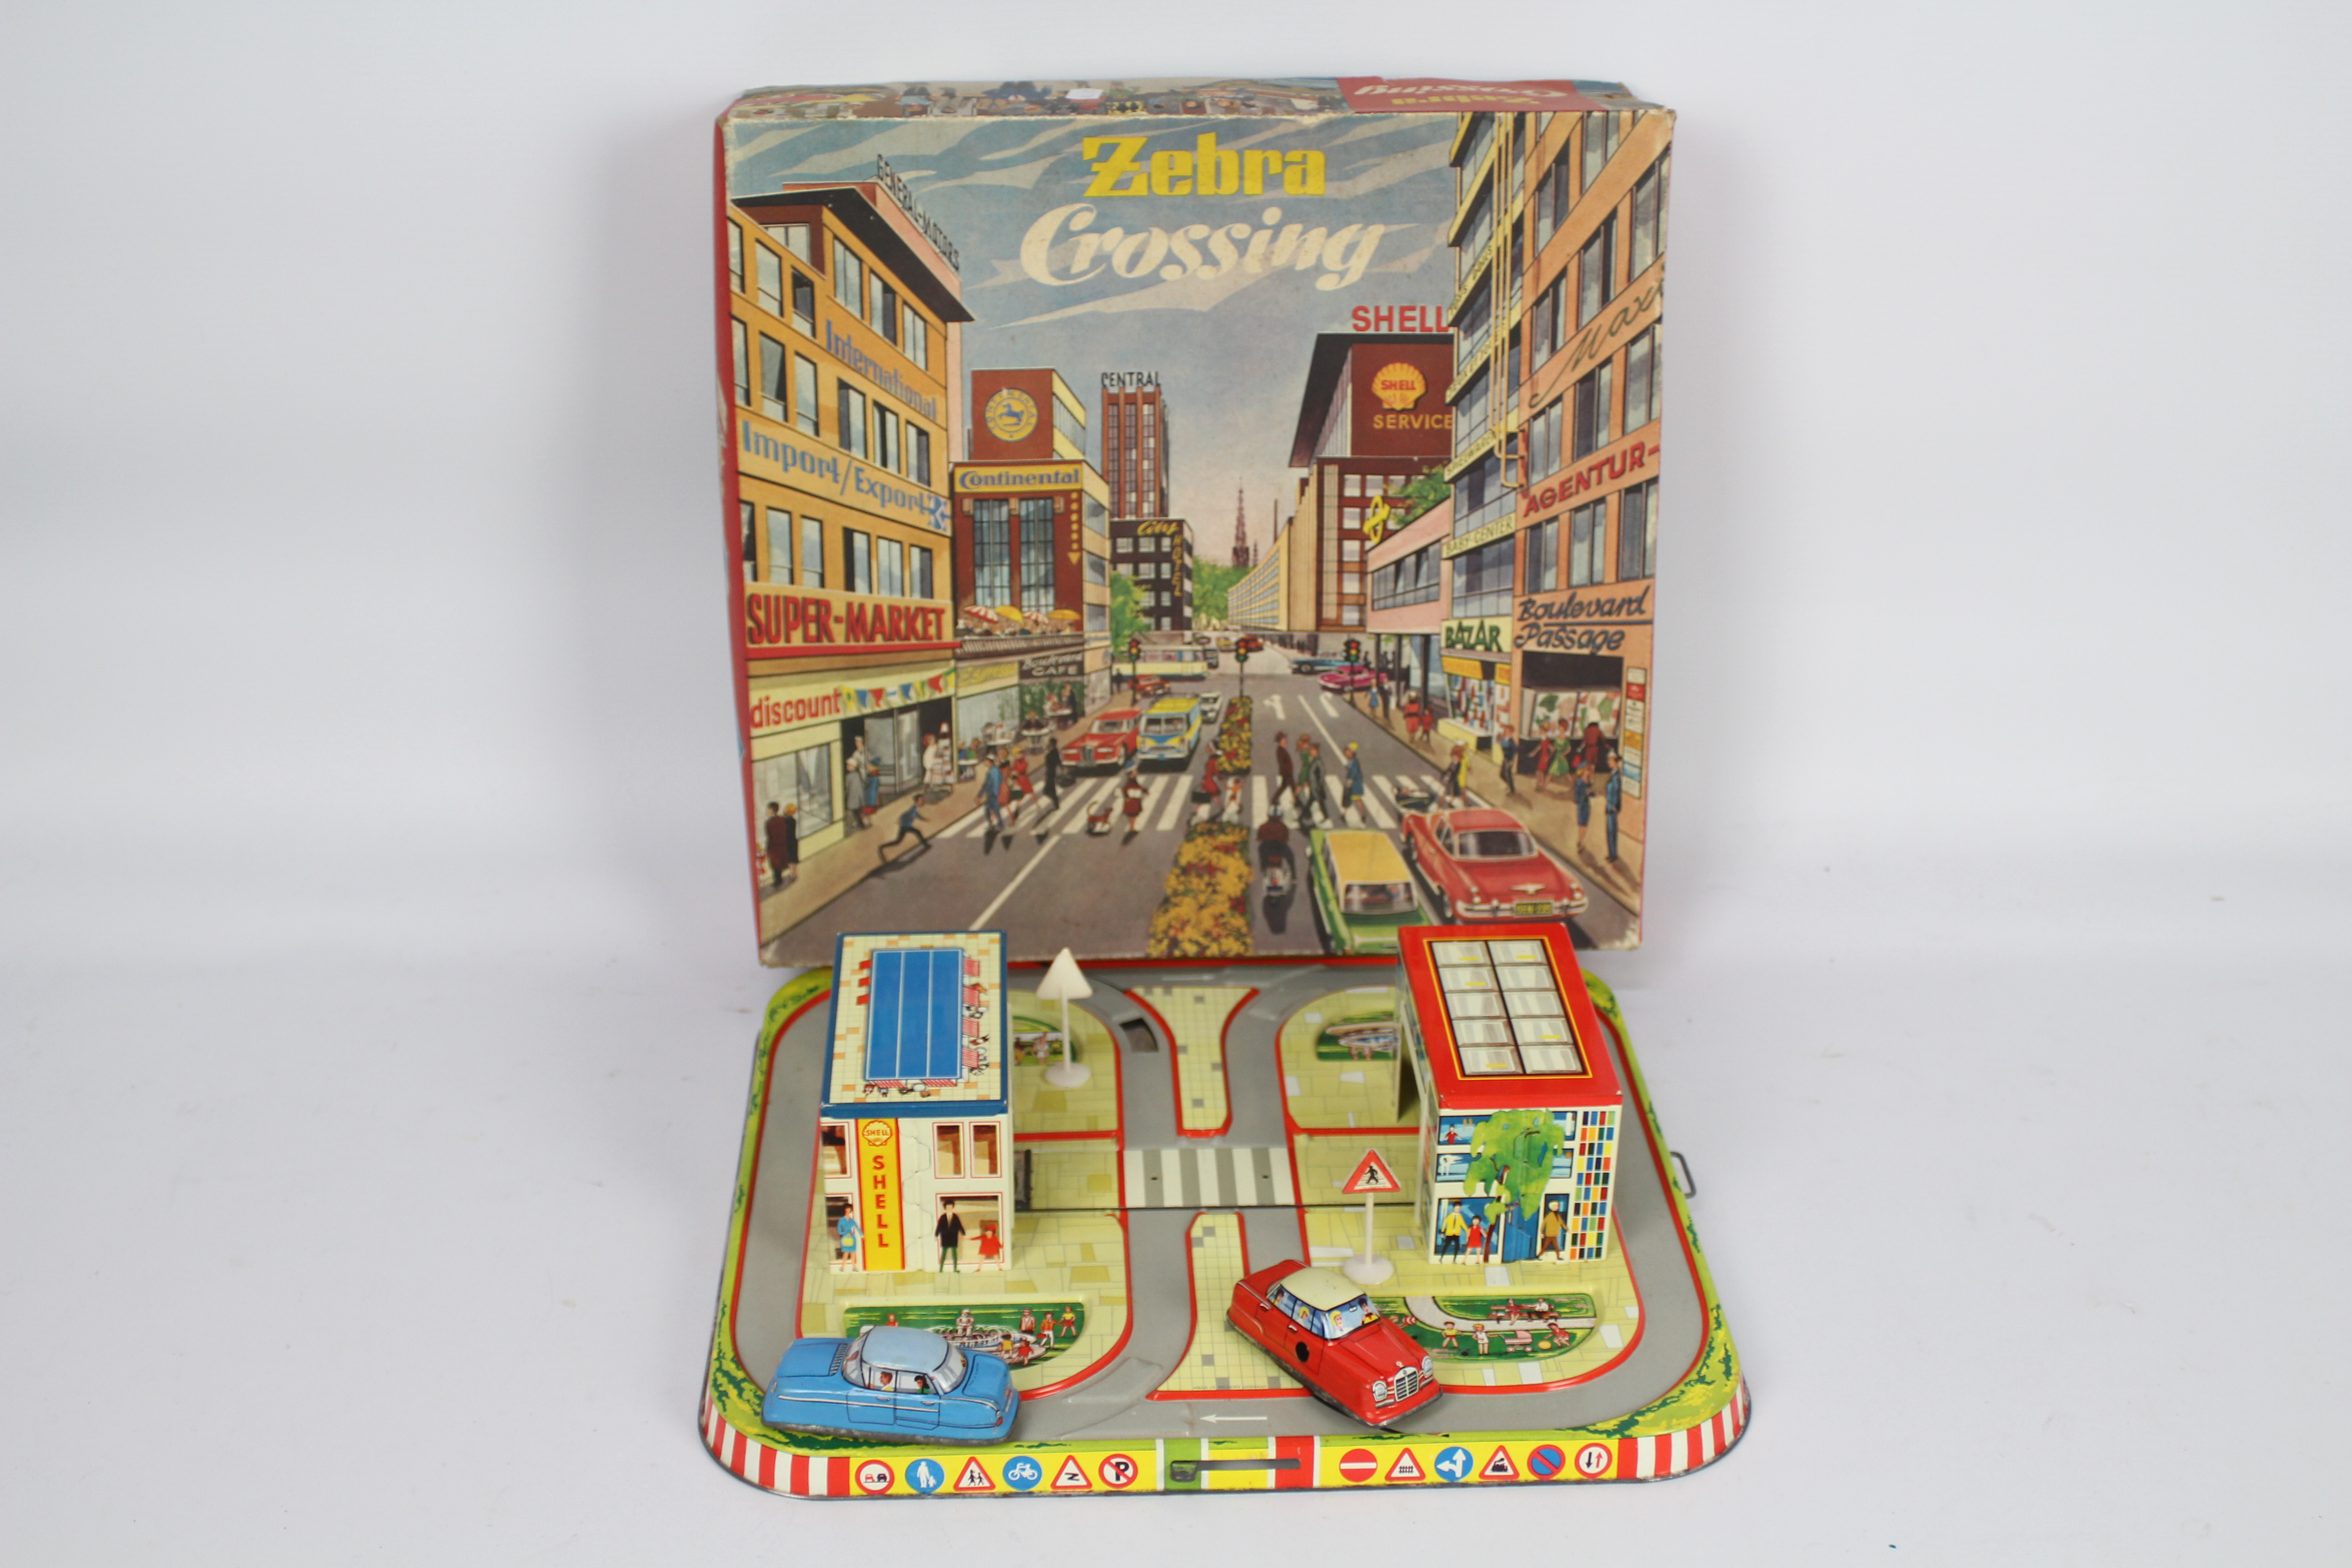 Technofix - A boxed tinplate Zebra Crossing set # 310 with clockwork Mercedes and Opel cars on a